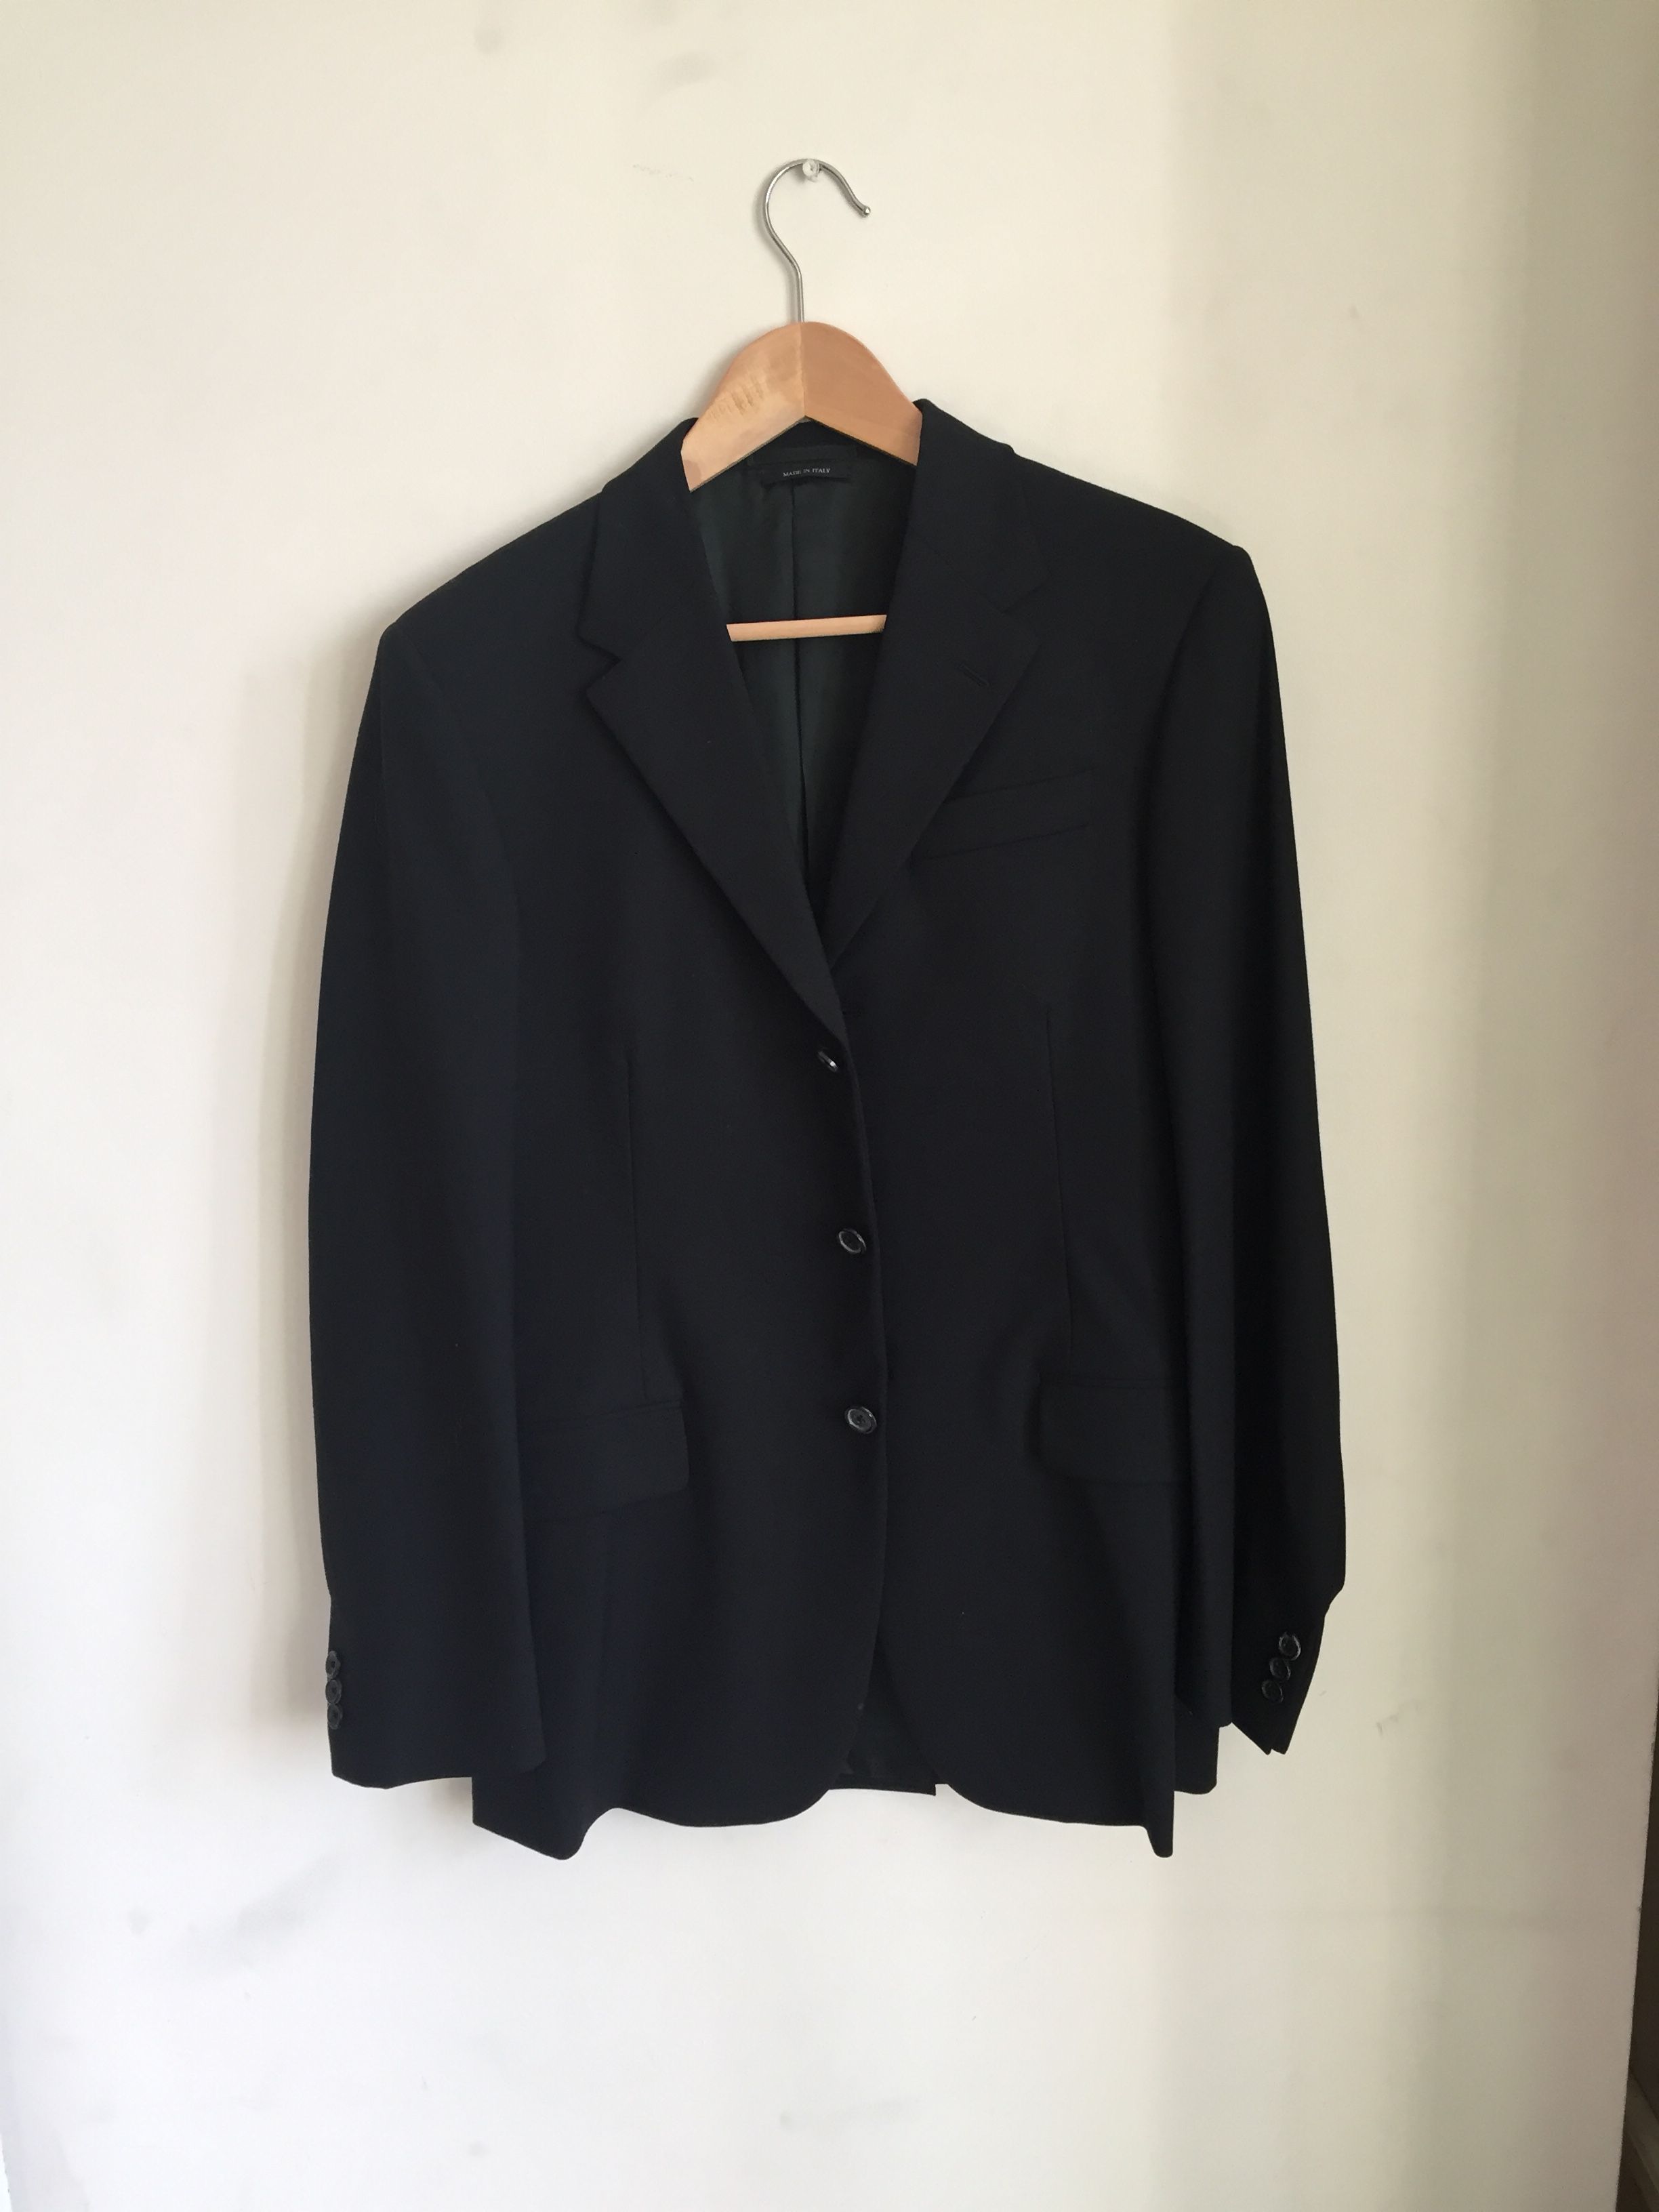 What price can I expect to sell my Prada suit for? A8100 | Styleforum